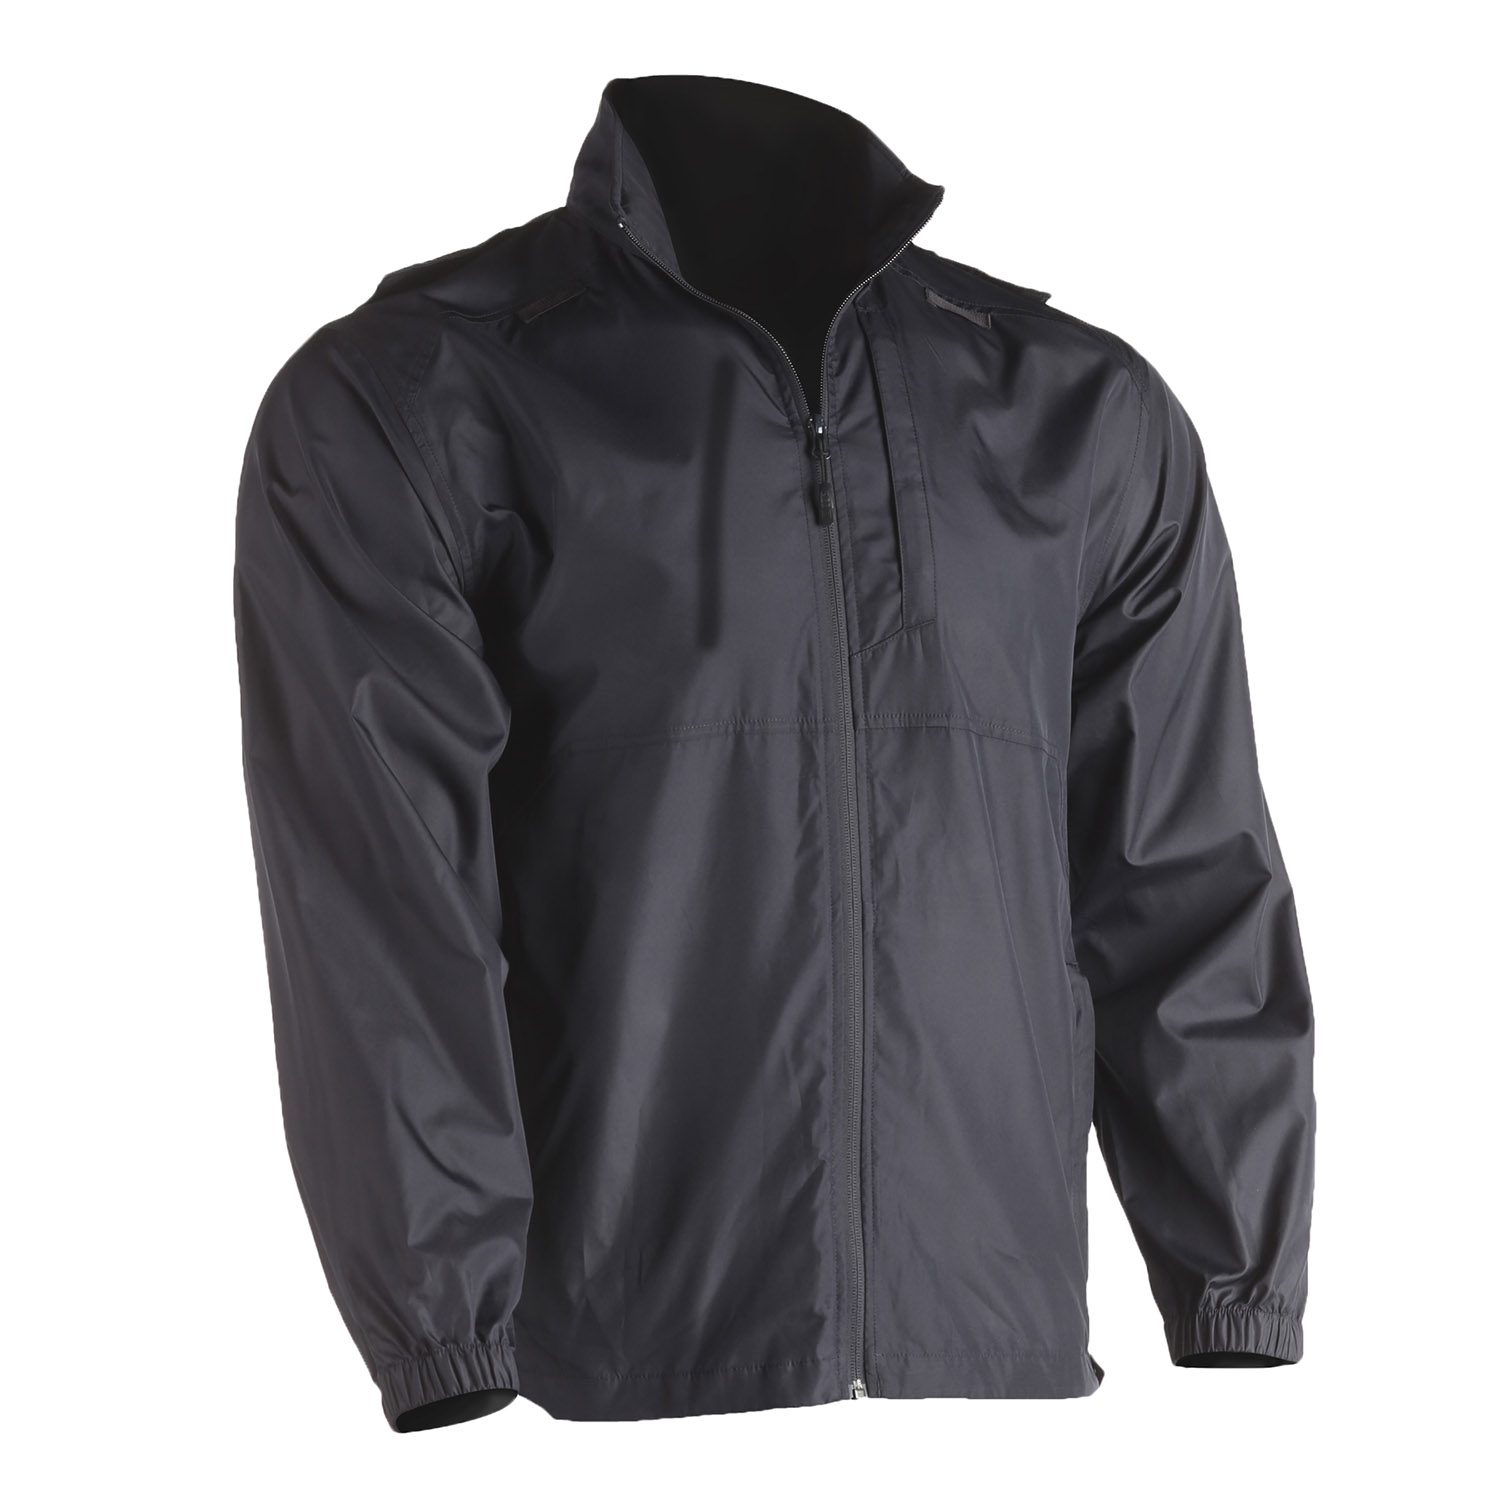 5.11 TACTICAL PACKABLE OPERATOR JACKET